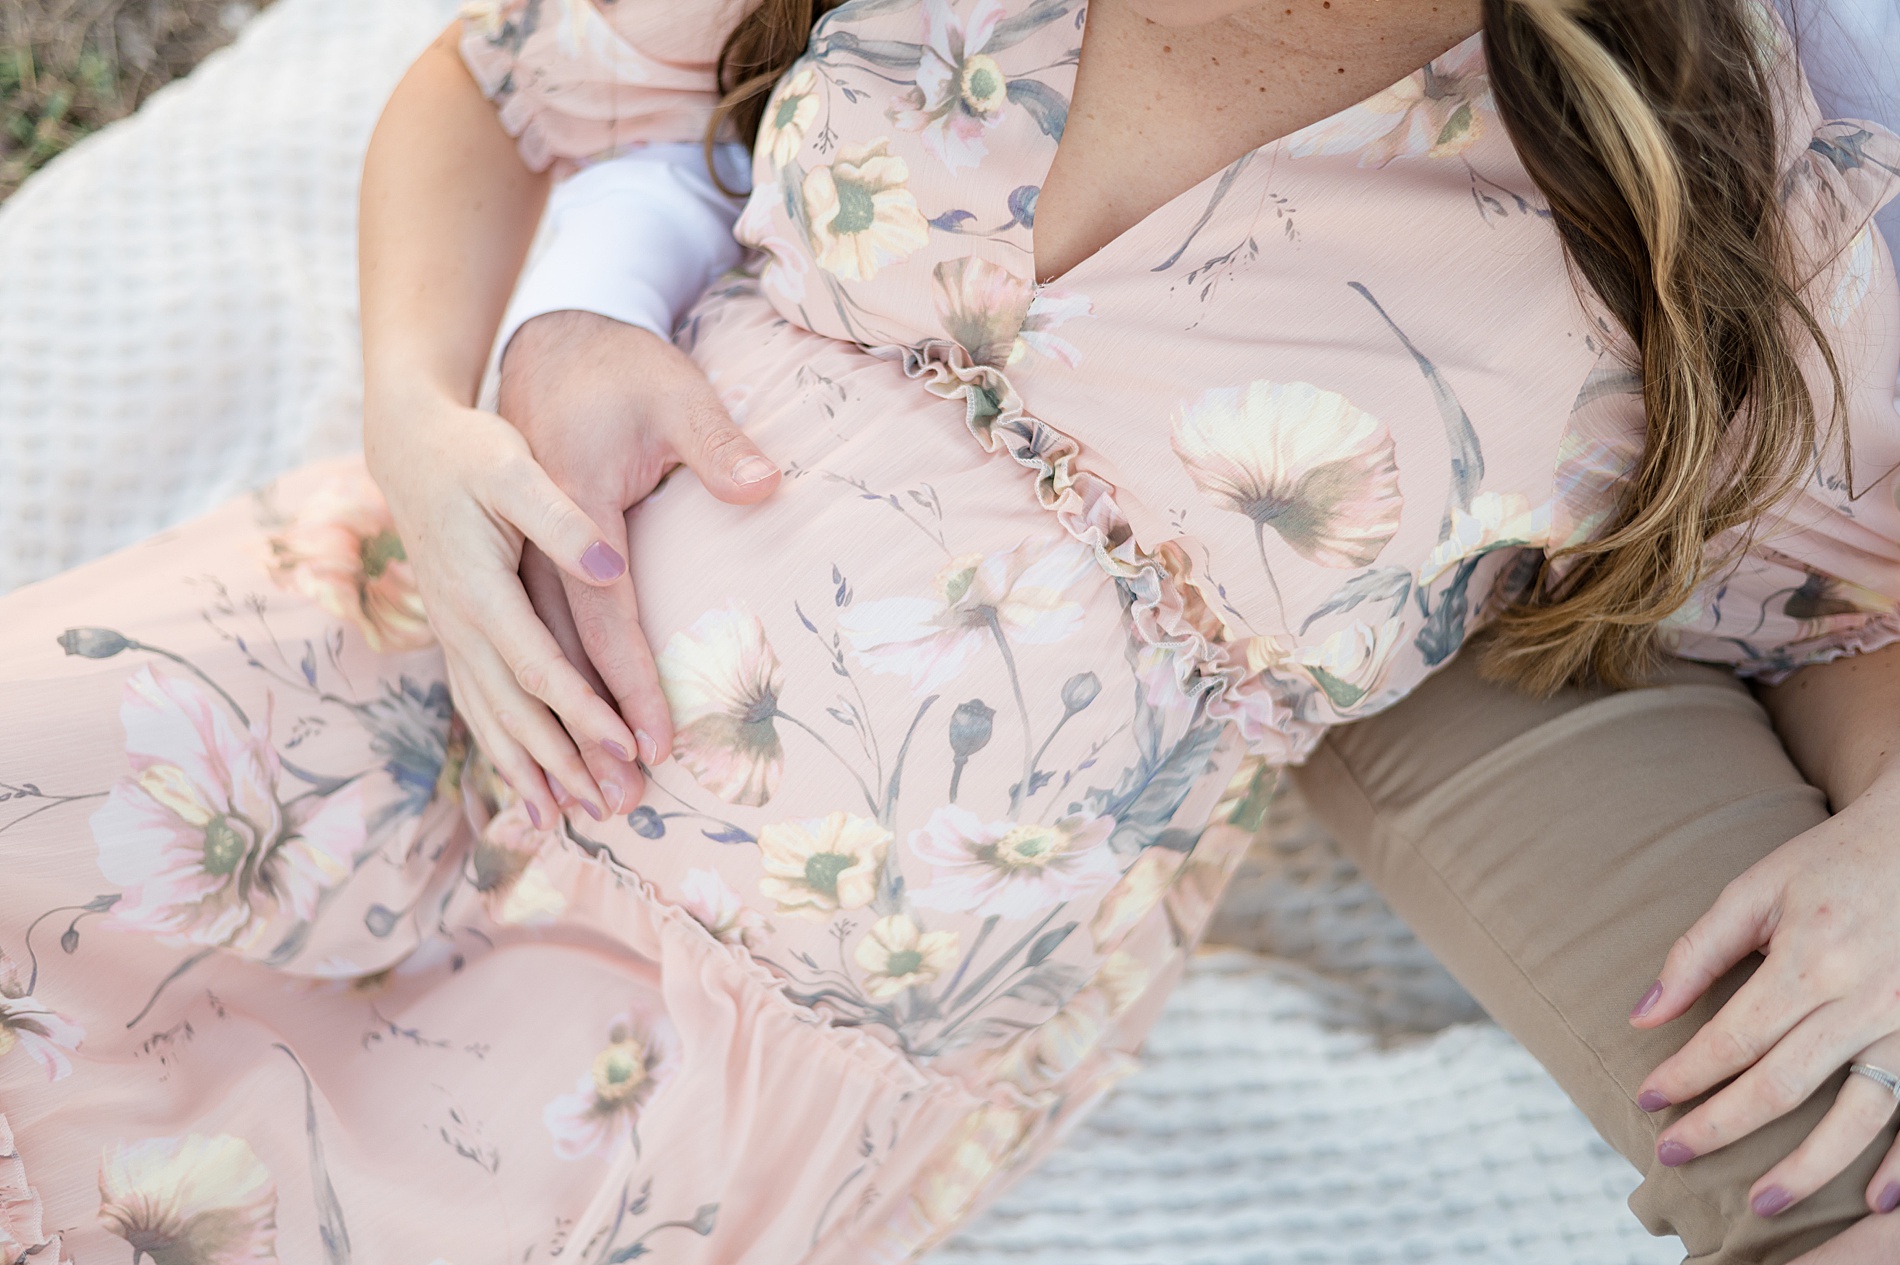 maternity portraits  taken by Lindsey Dutton Photography, a Dallas maternity photographer
 